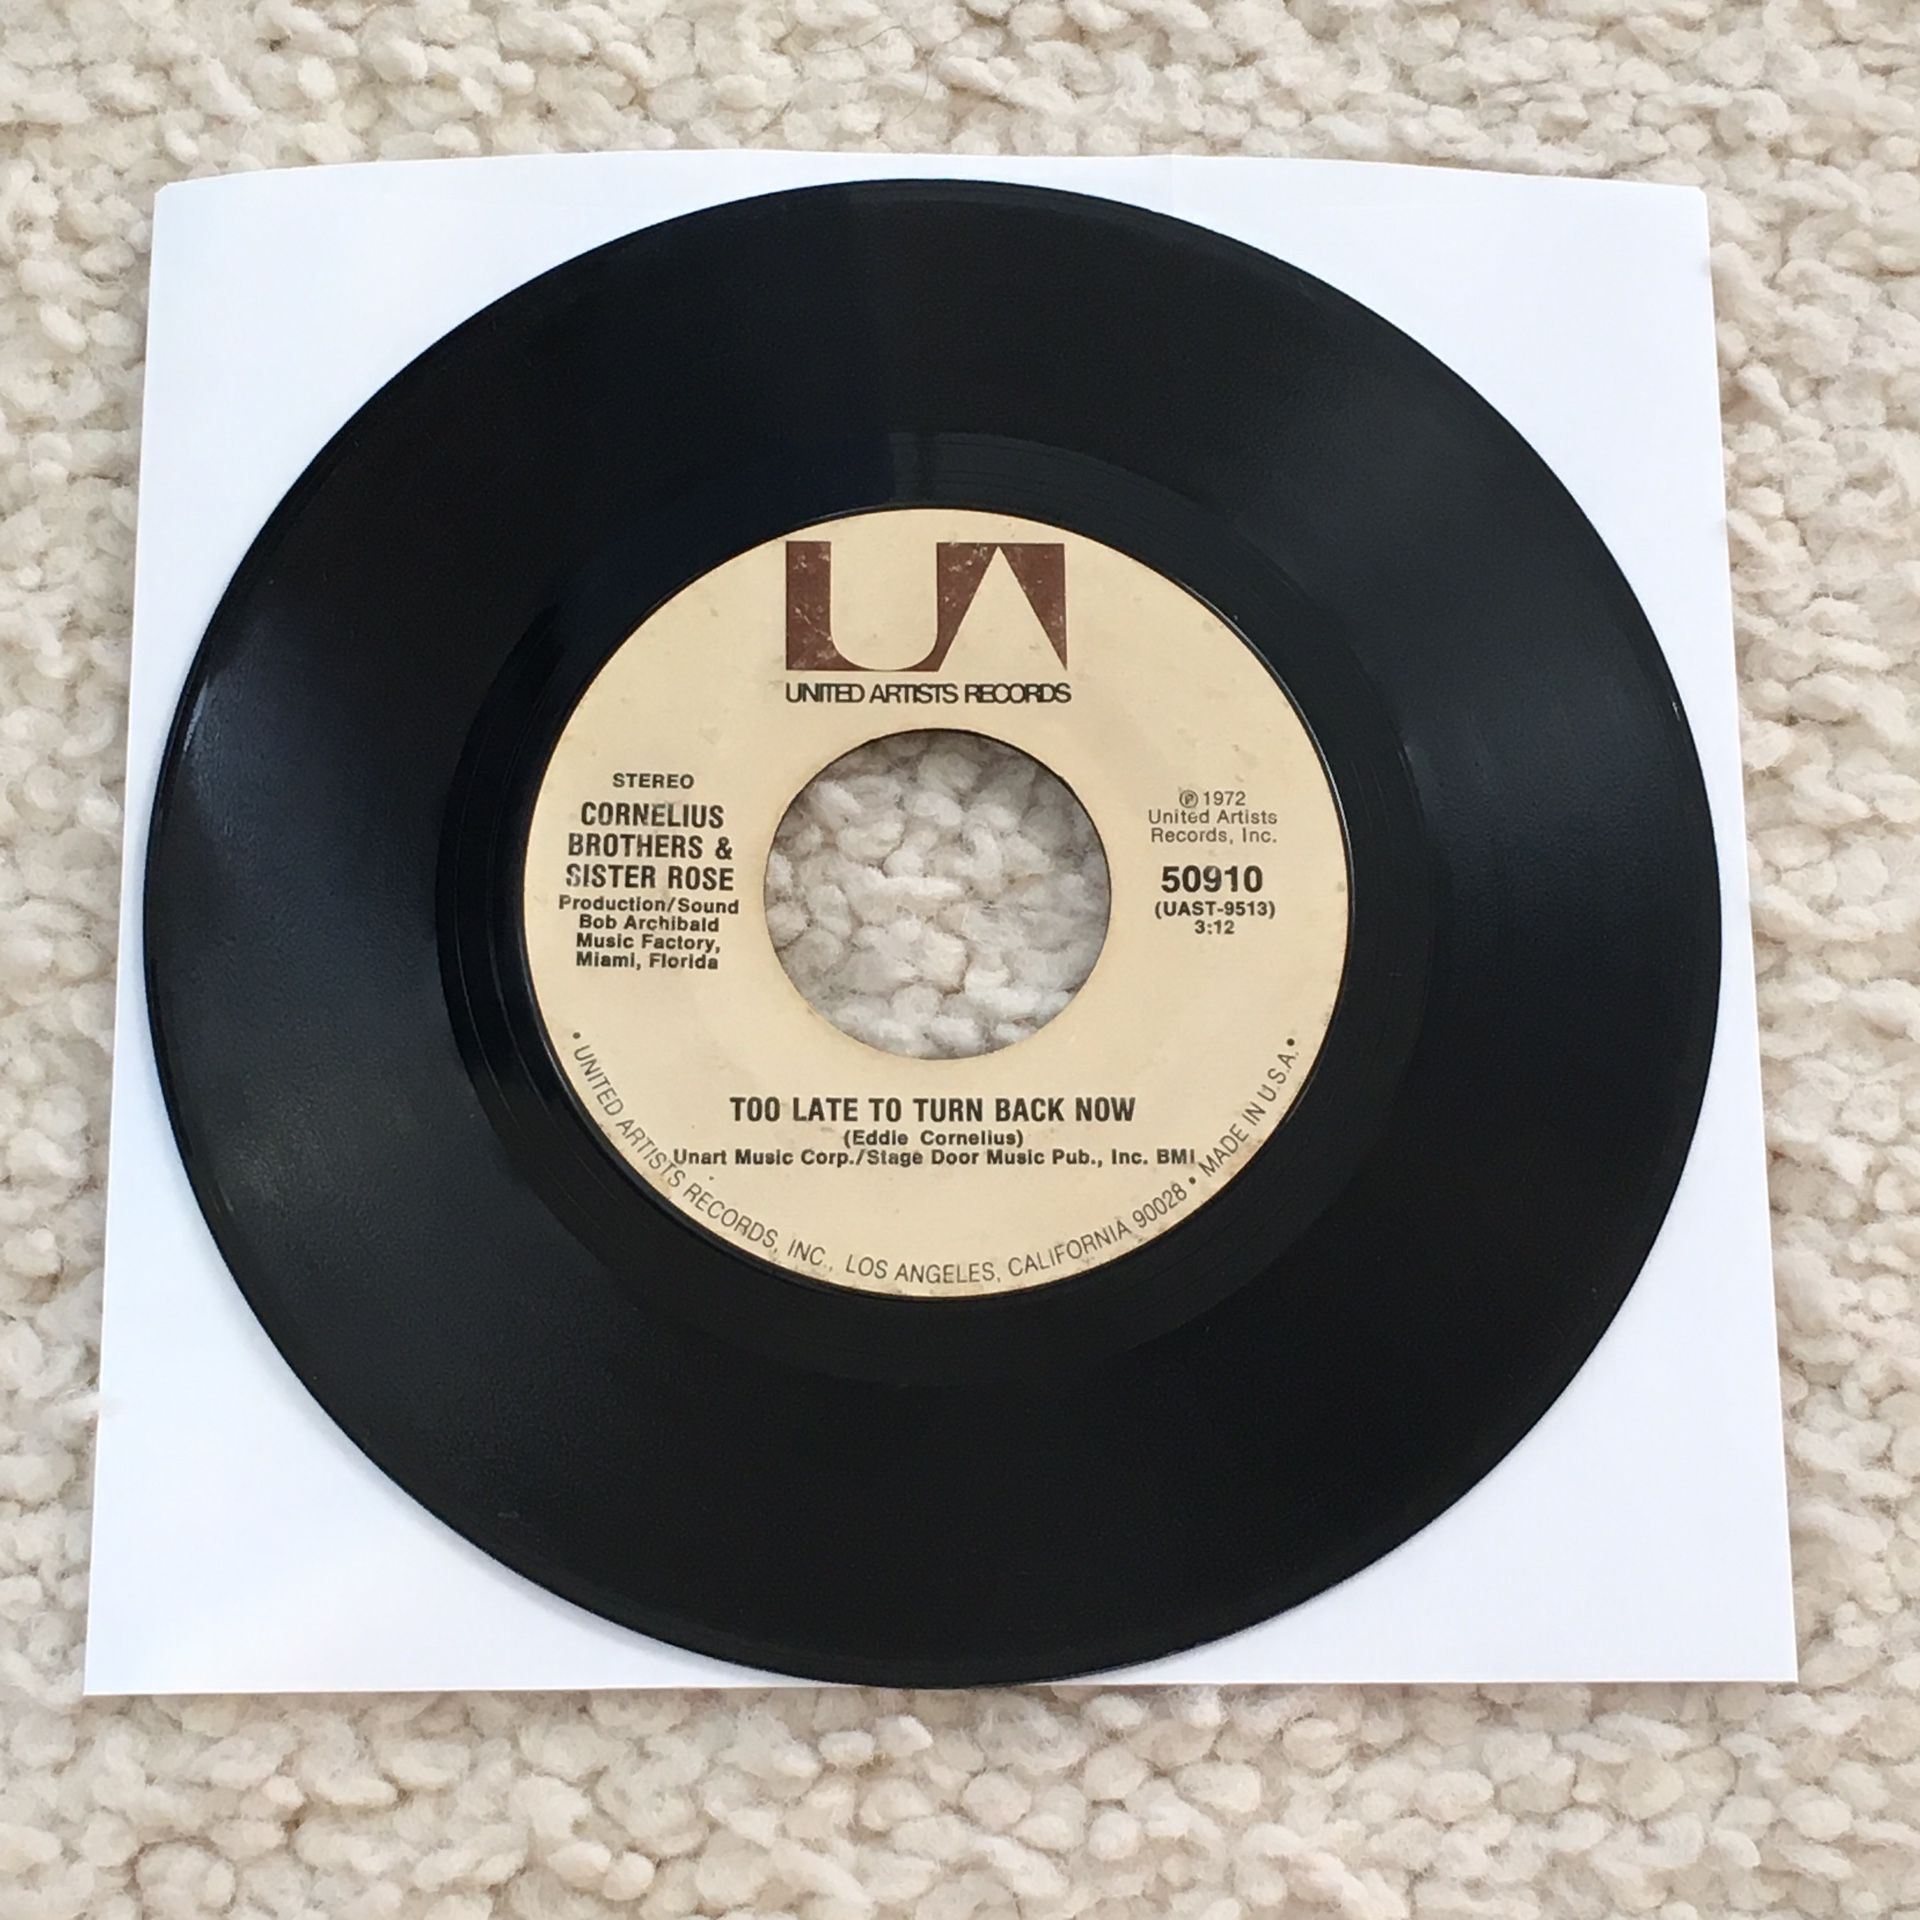 Cornelius Brothers & Sister Rose “Too Late To Turn Back Now” vinyl 7” single 1972 United Artists Records 50910 very nice clean copy 70s soul